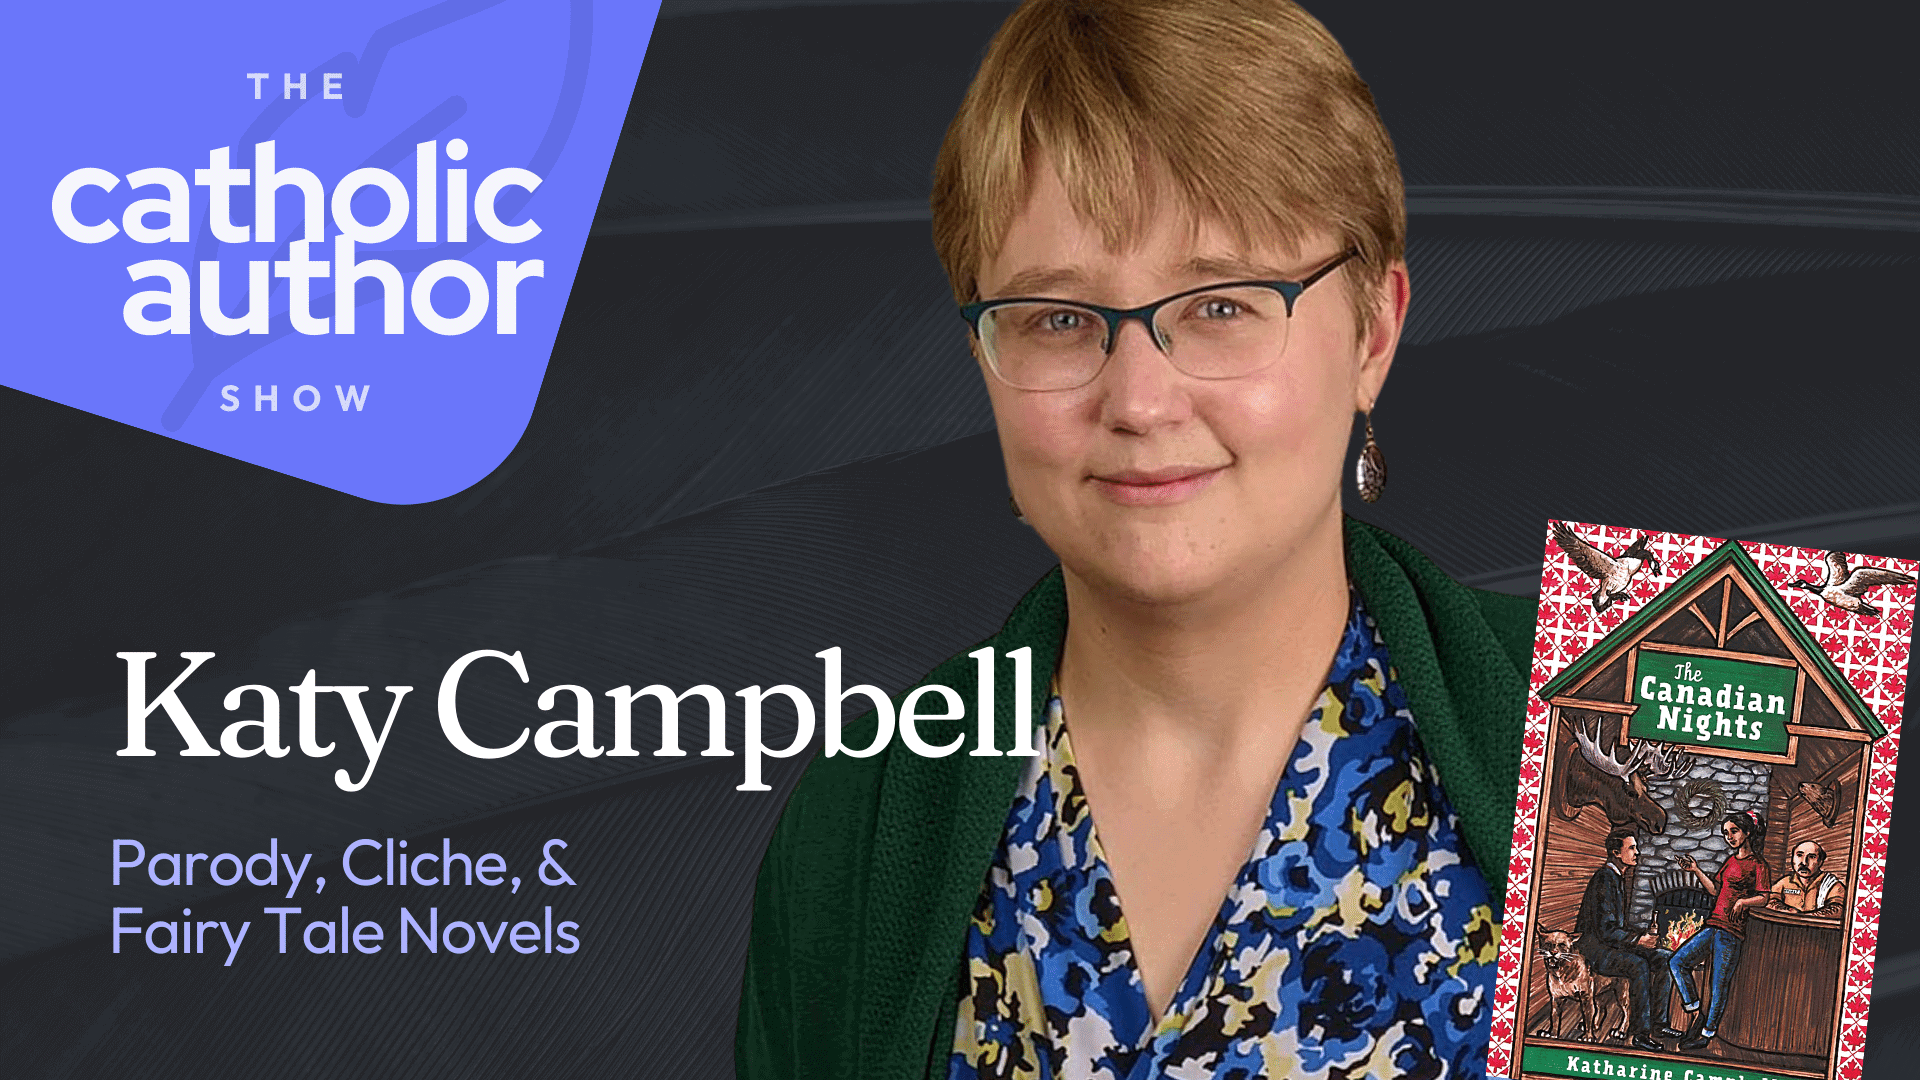 Katy Campbell on Parody, Cliche, and Fairy Tale Novels